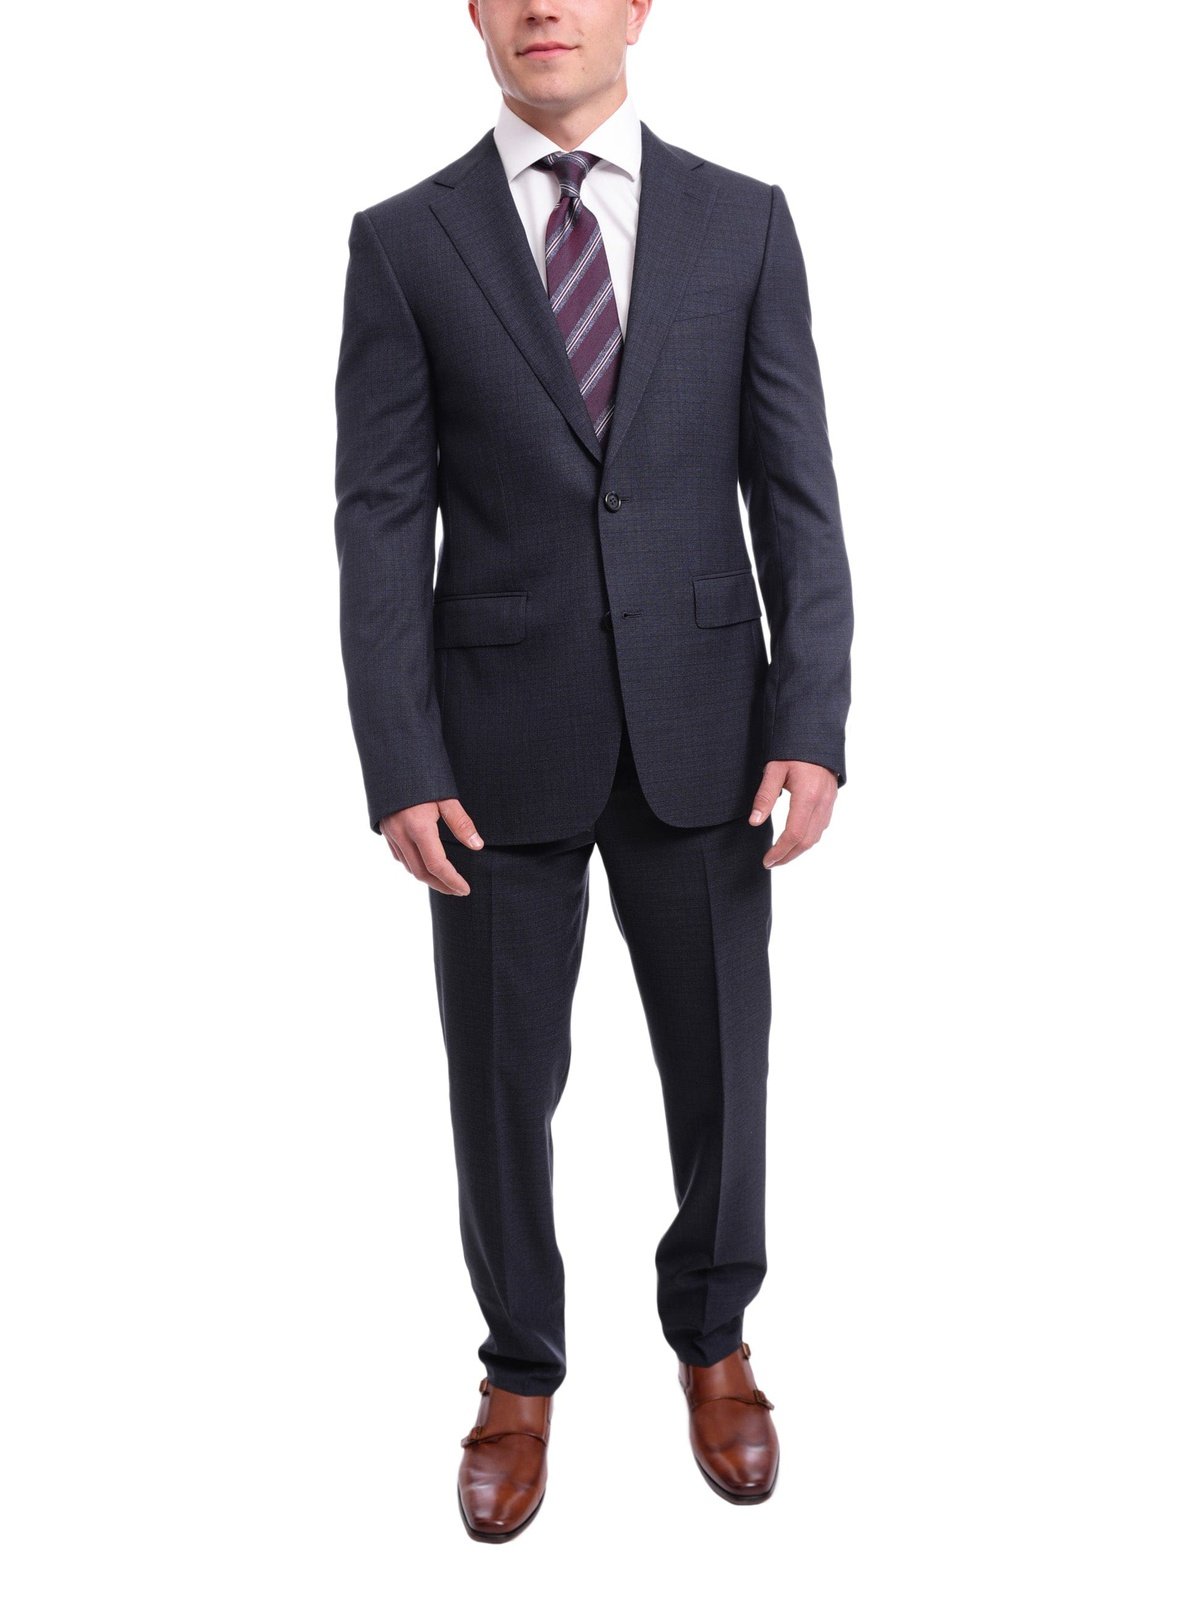 Napoli TWO PIECE SUITS Napoli Slim Fit Navy Blue Textured Check Two Button Half Canvassed Wool Suit